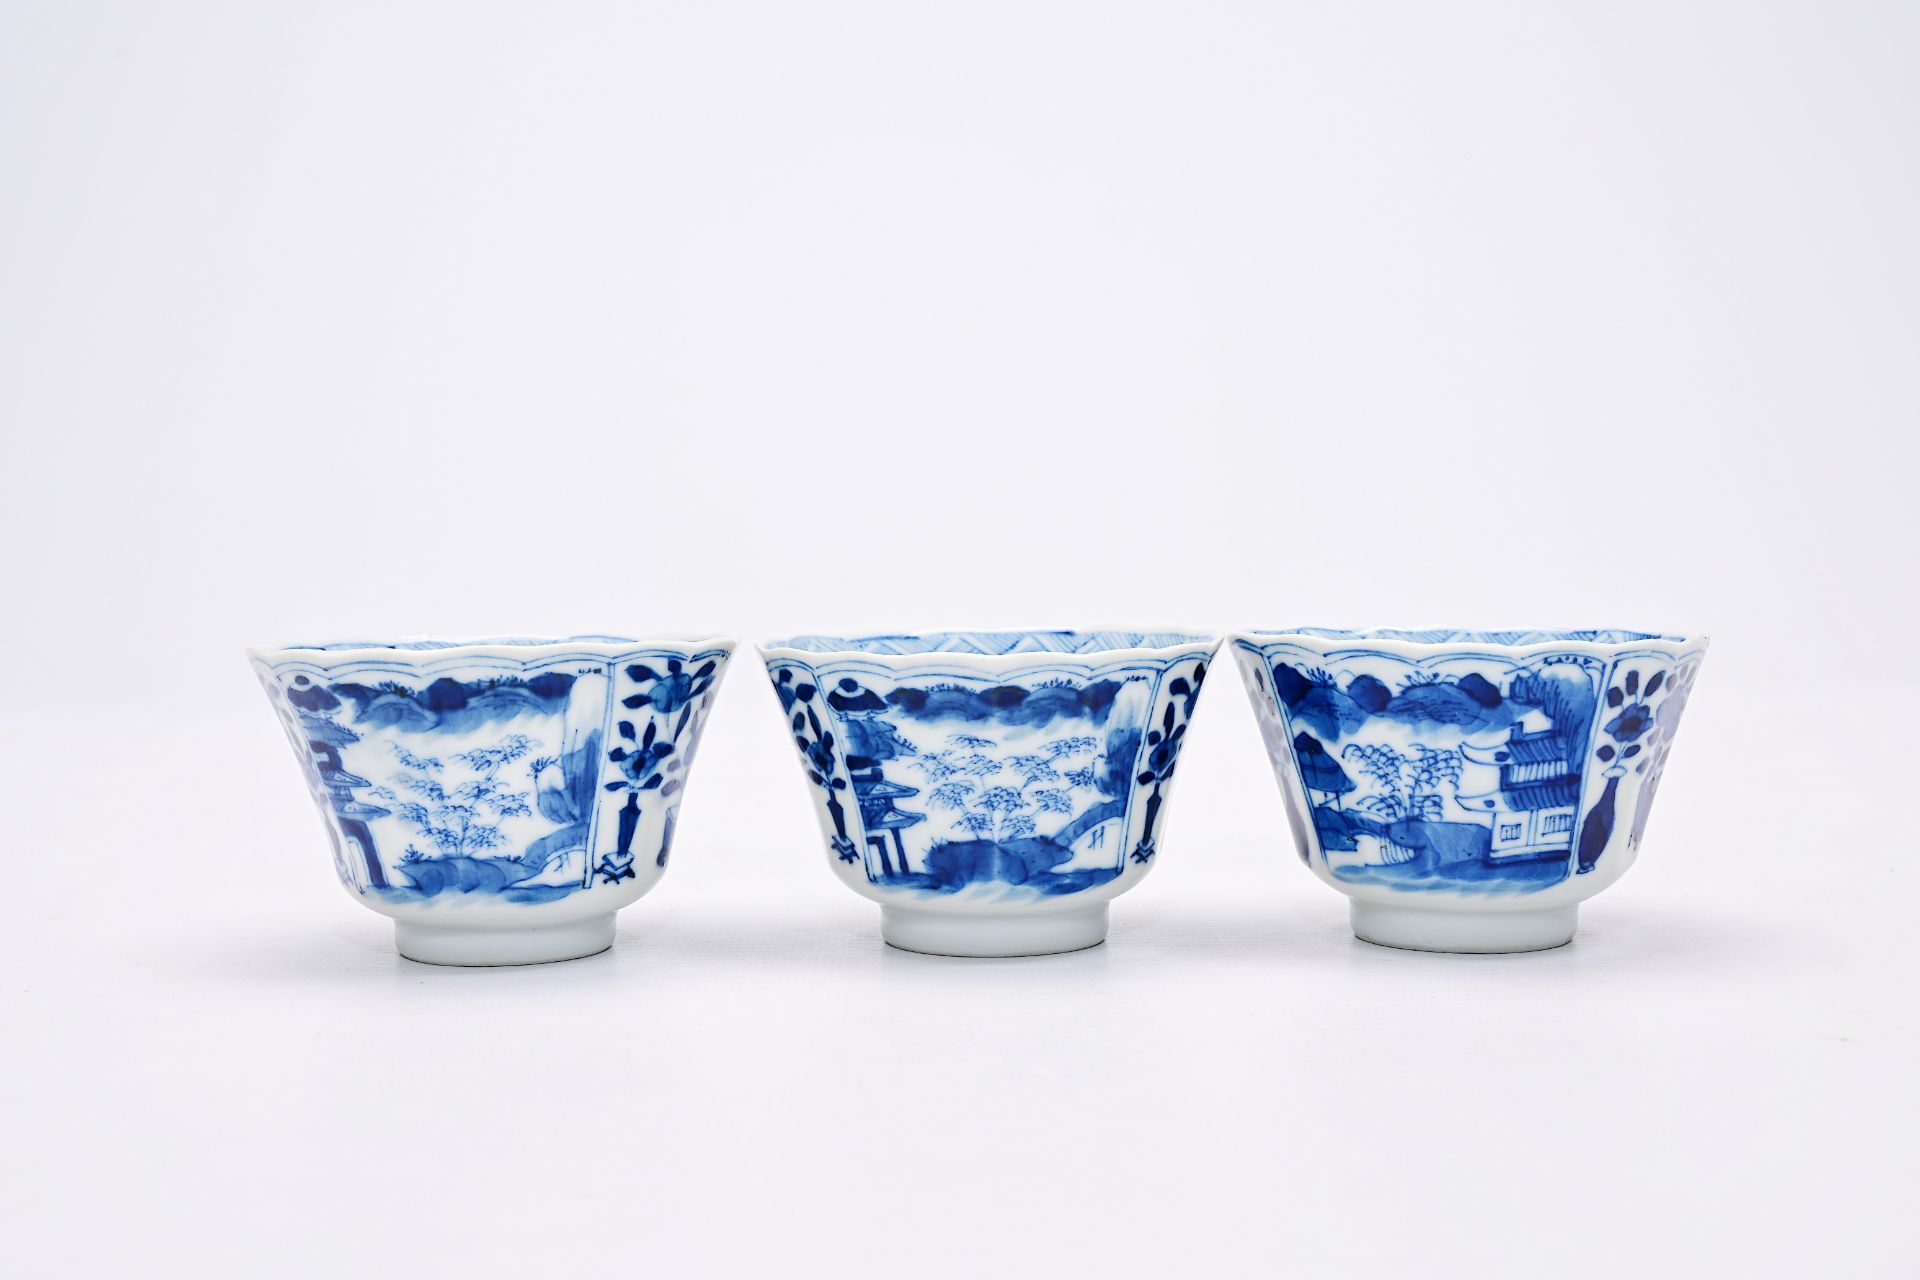 A varied collection of Chinese blue and white porcelain with floral design and figures in a landscap - Image 11 of 22